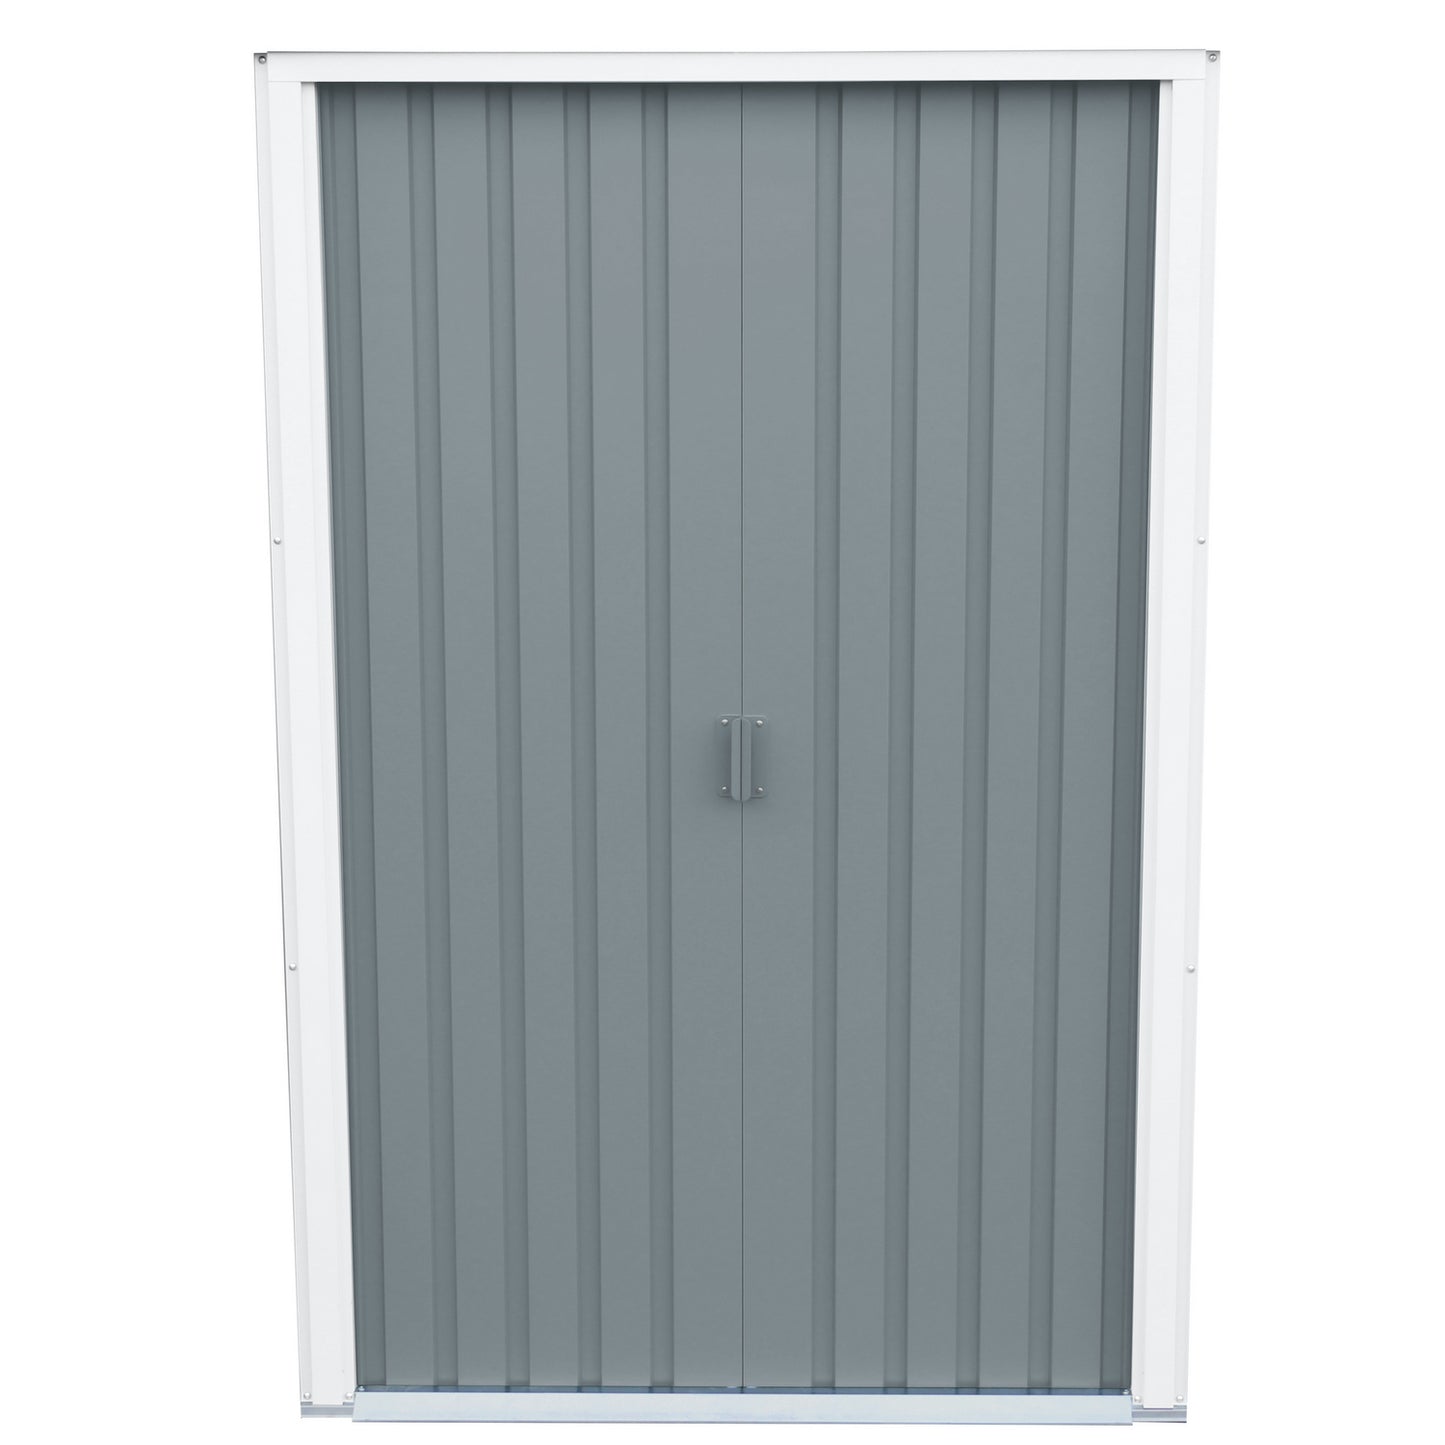 DuraMax | 8x6 ft Top Pent Roof Metal Storage Shed With Skylight - Light Gray | Eastern States